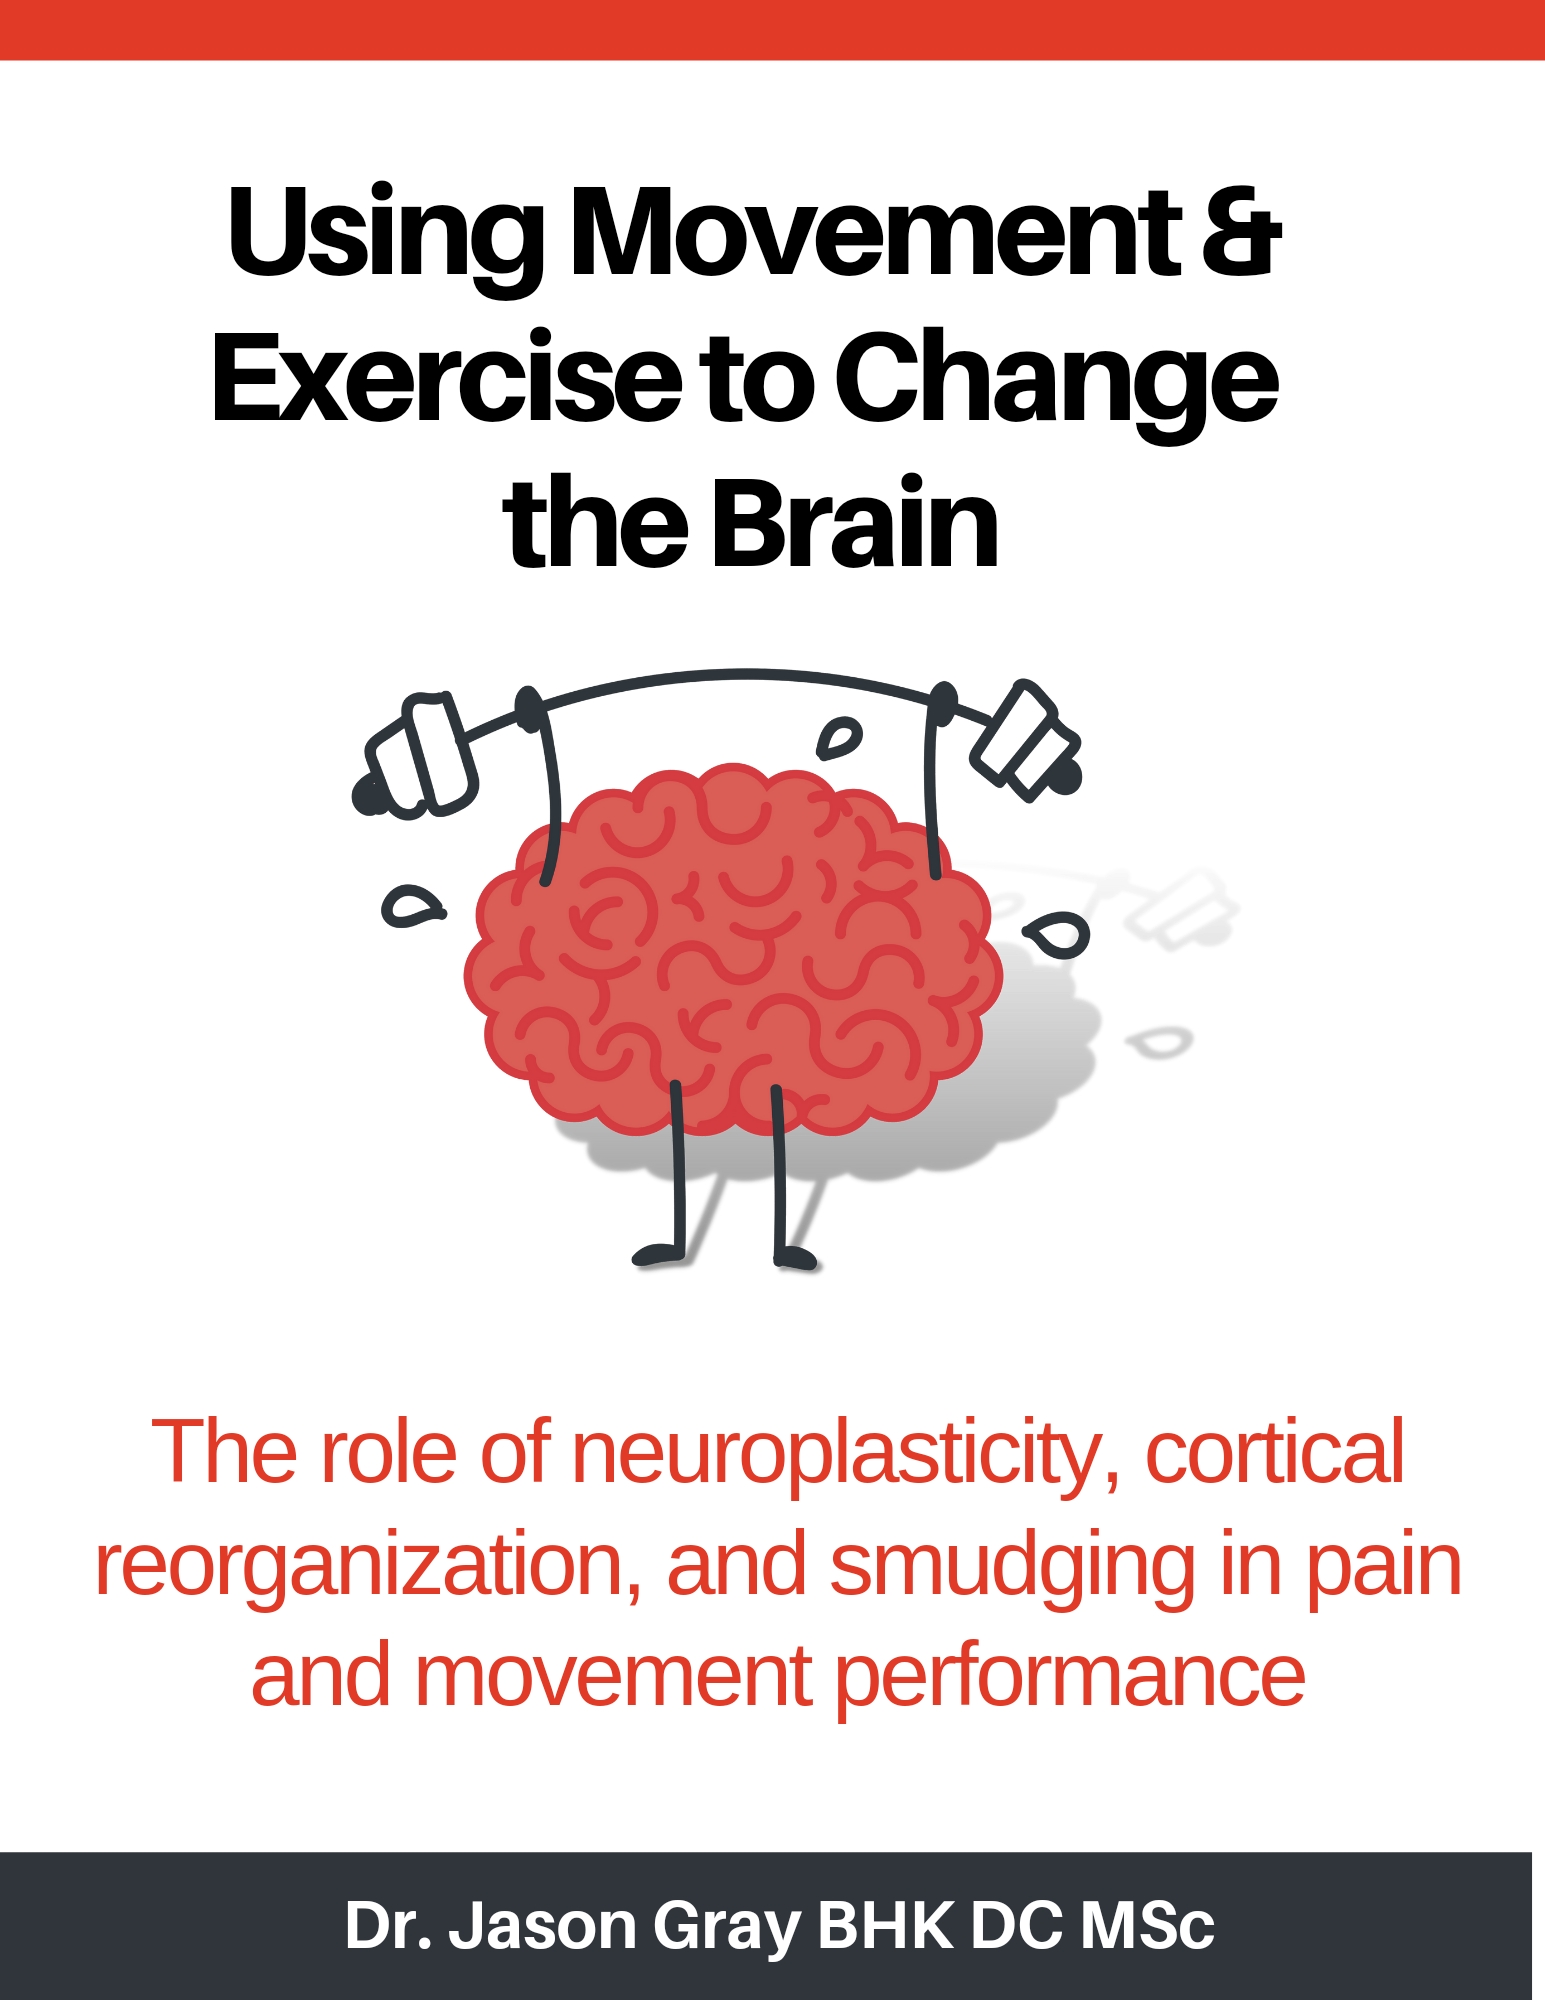 using exercise to change the brain